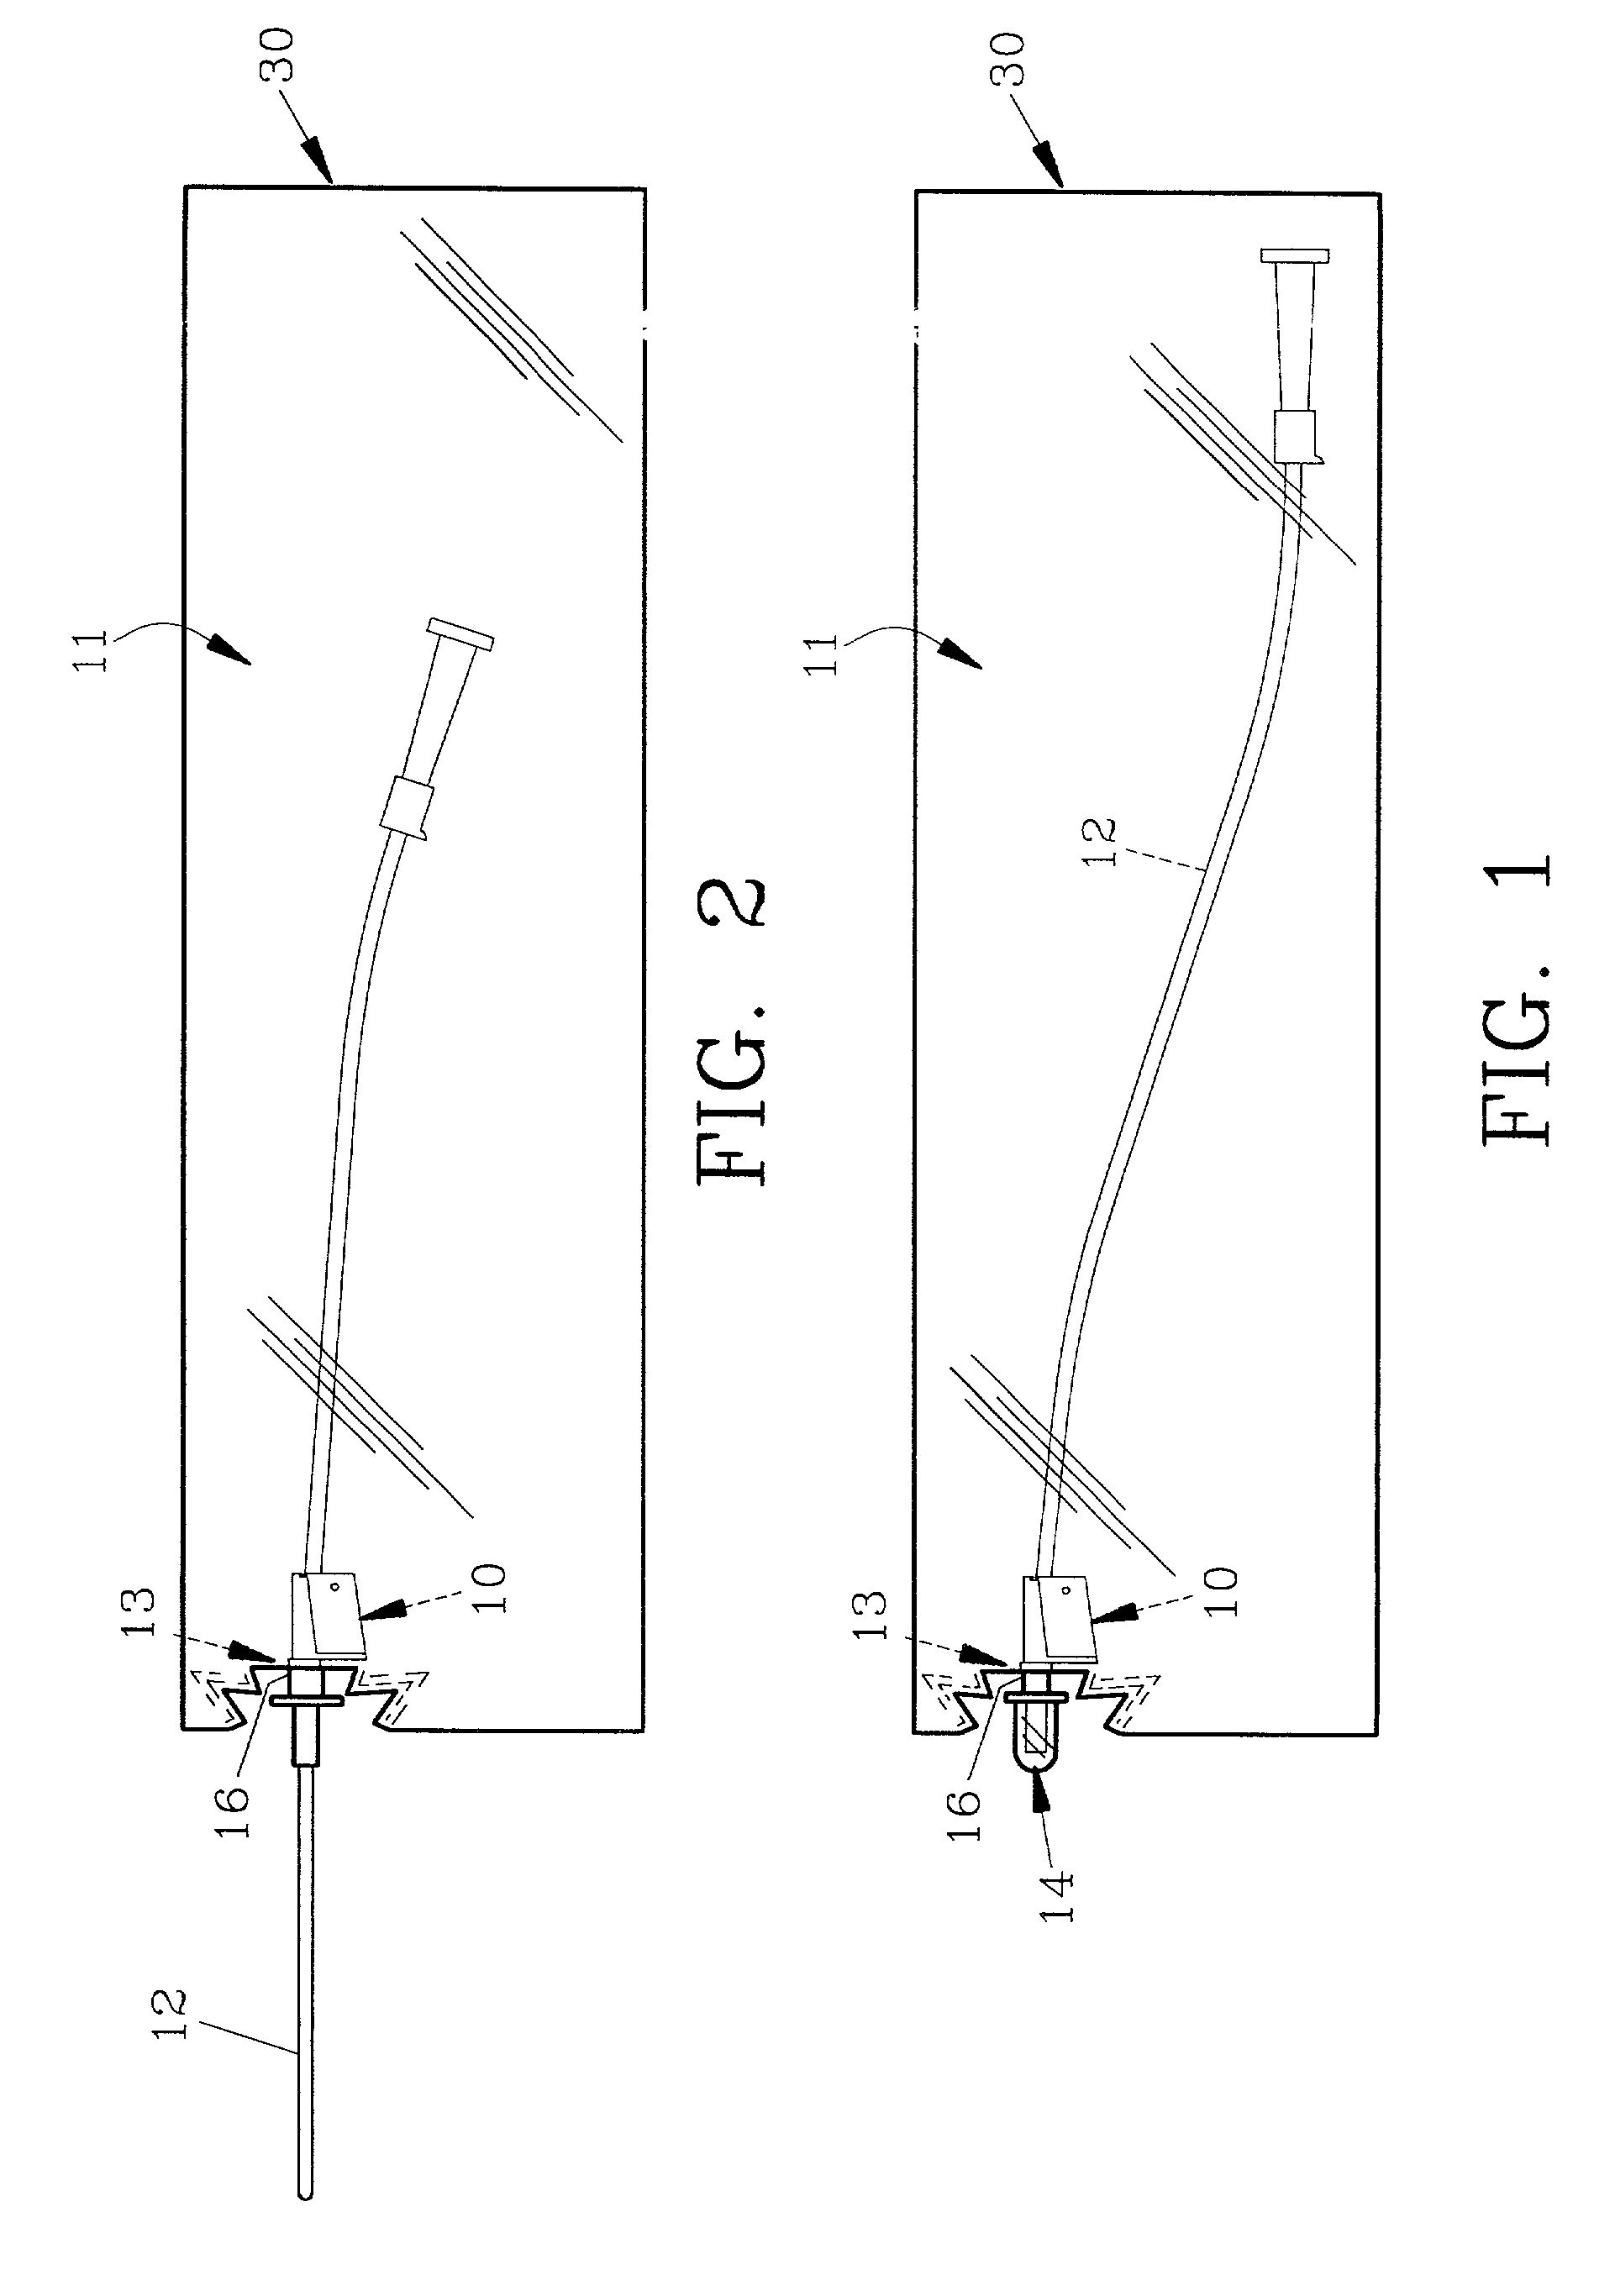 Catheter movement control device and method